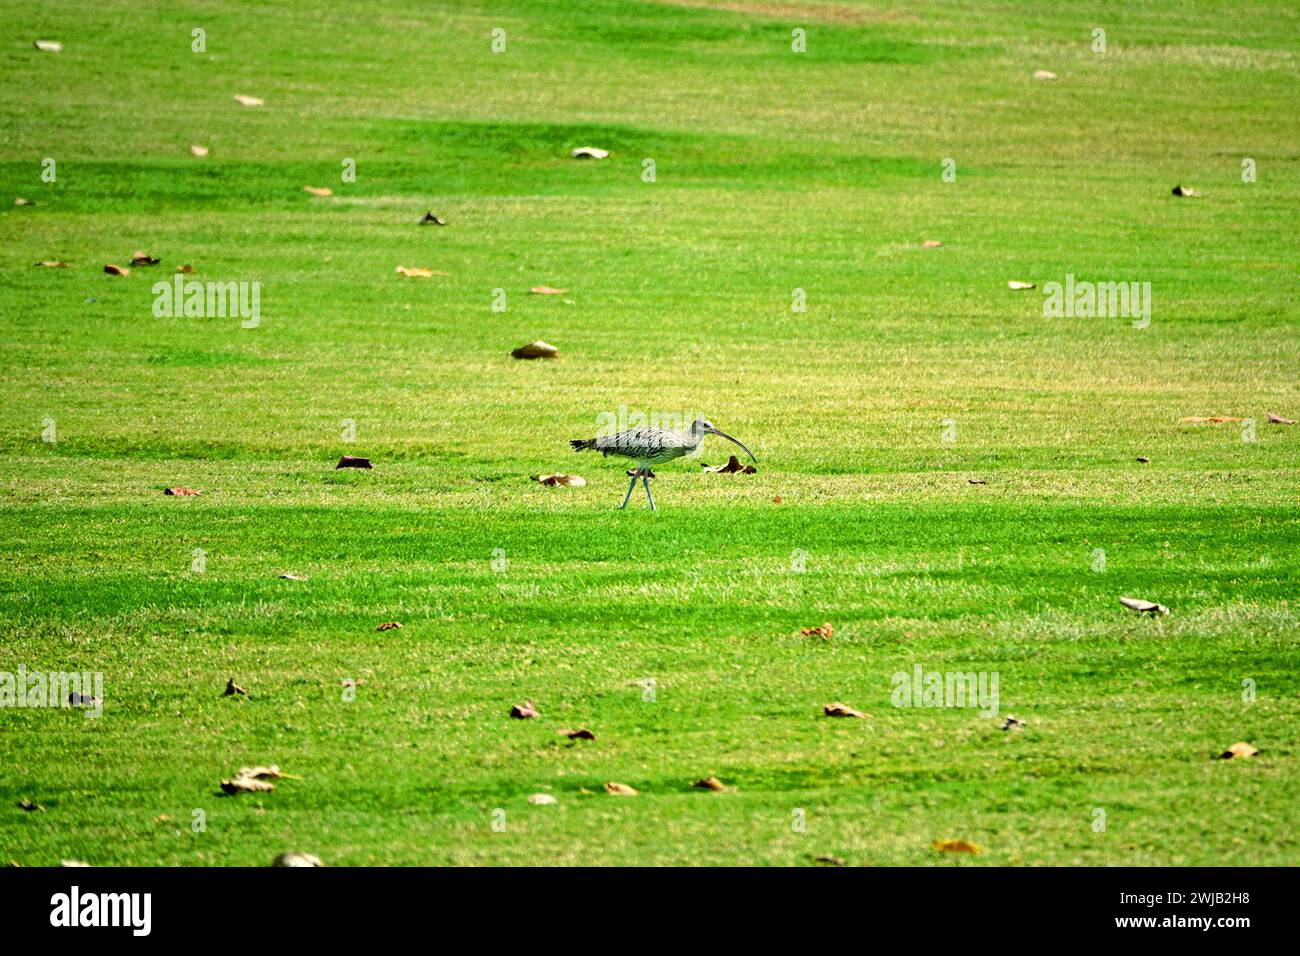 The Eurasian curlew (Numenius arquata) wintering on the lawn of the city Yas Island Abu Dhabi Stock Photo